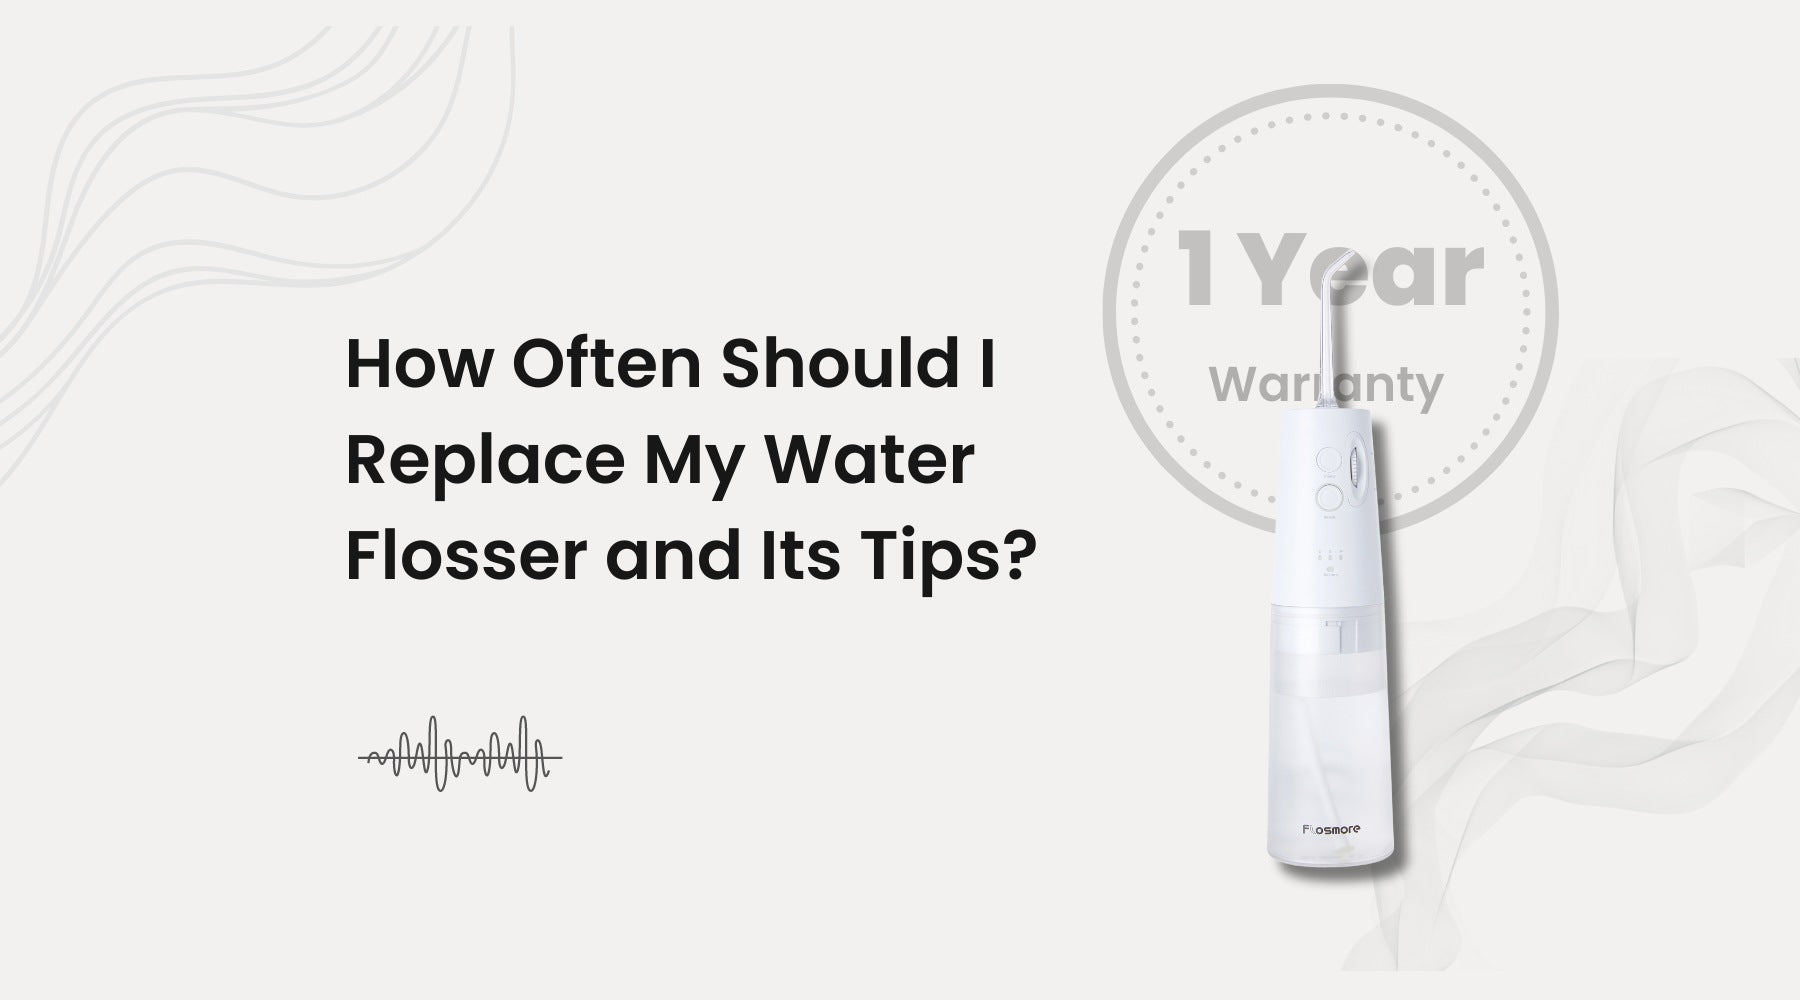 How Often Should I Replace My Water Flosser and Its Tips?